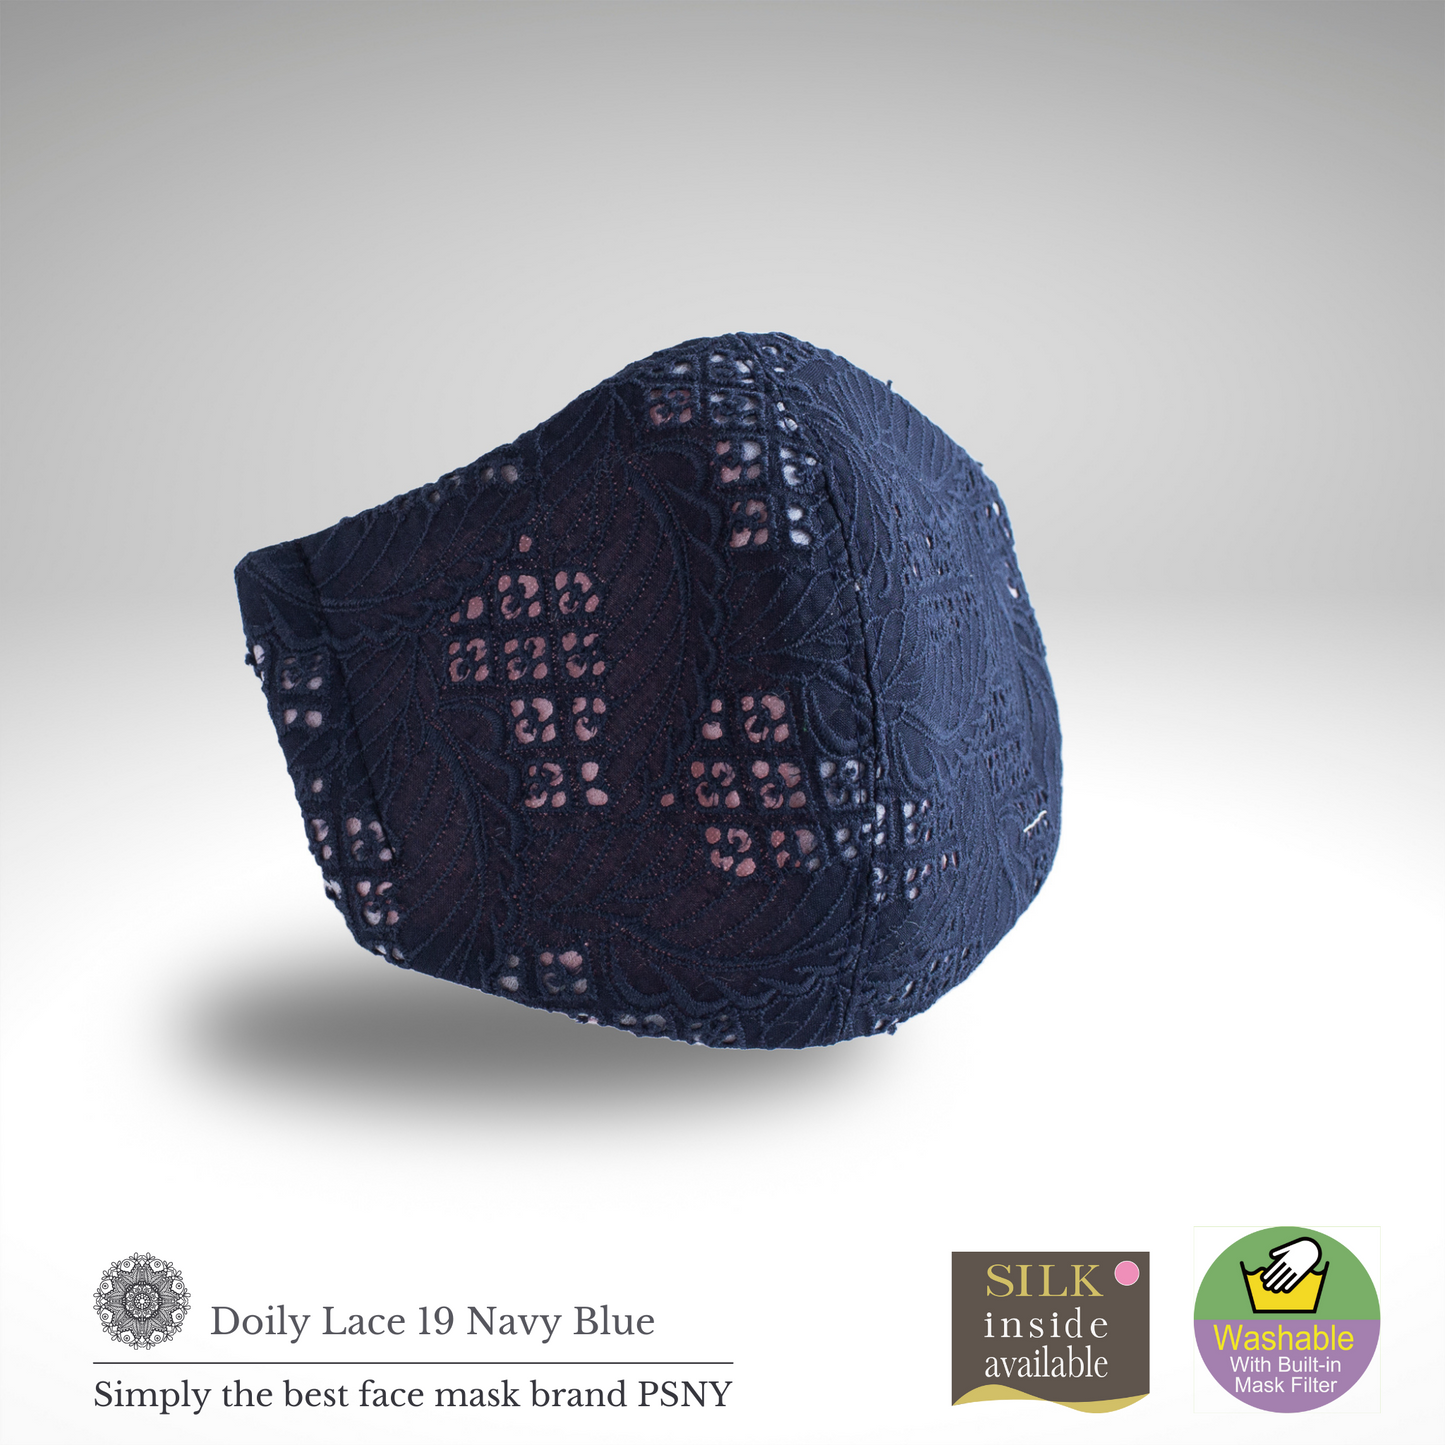 Doily Lace Dark Blue 2 Mask with Filter Mask LD19